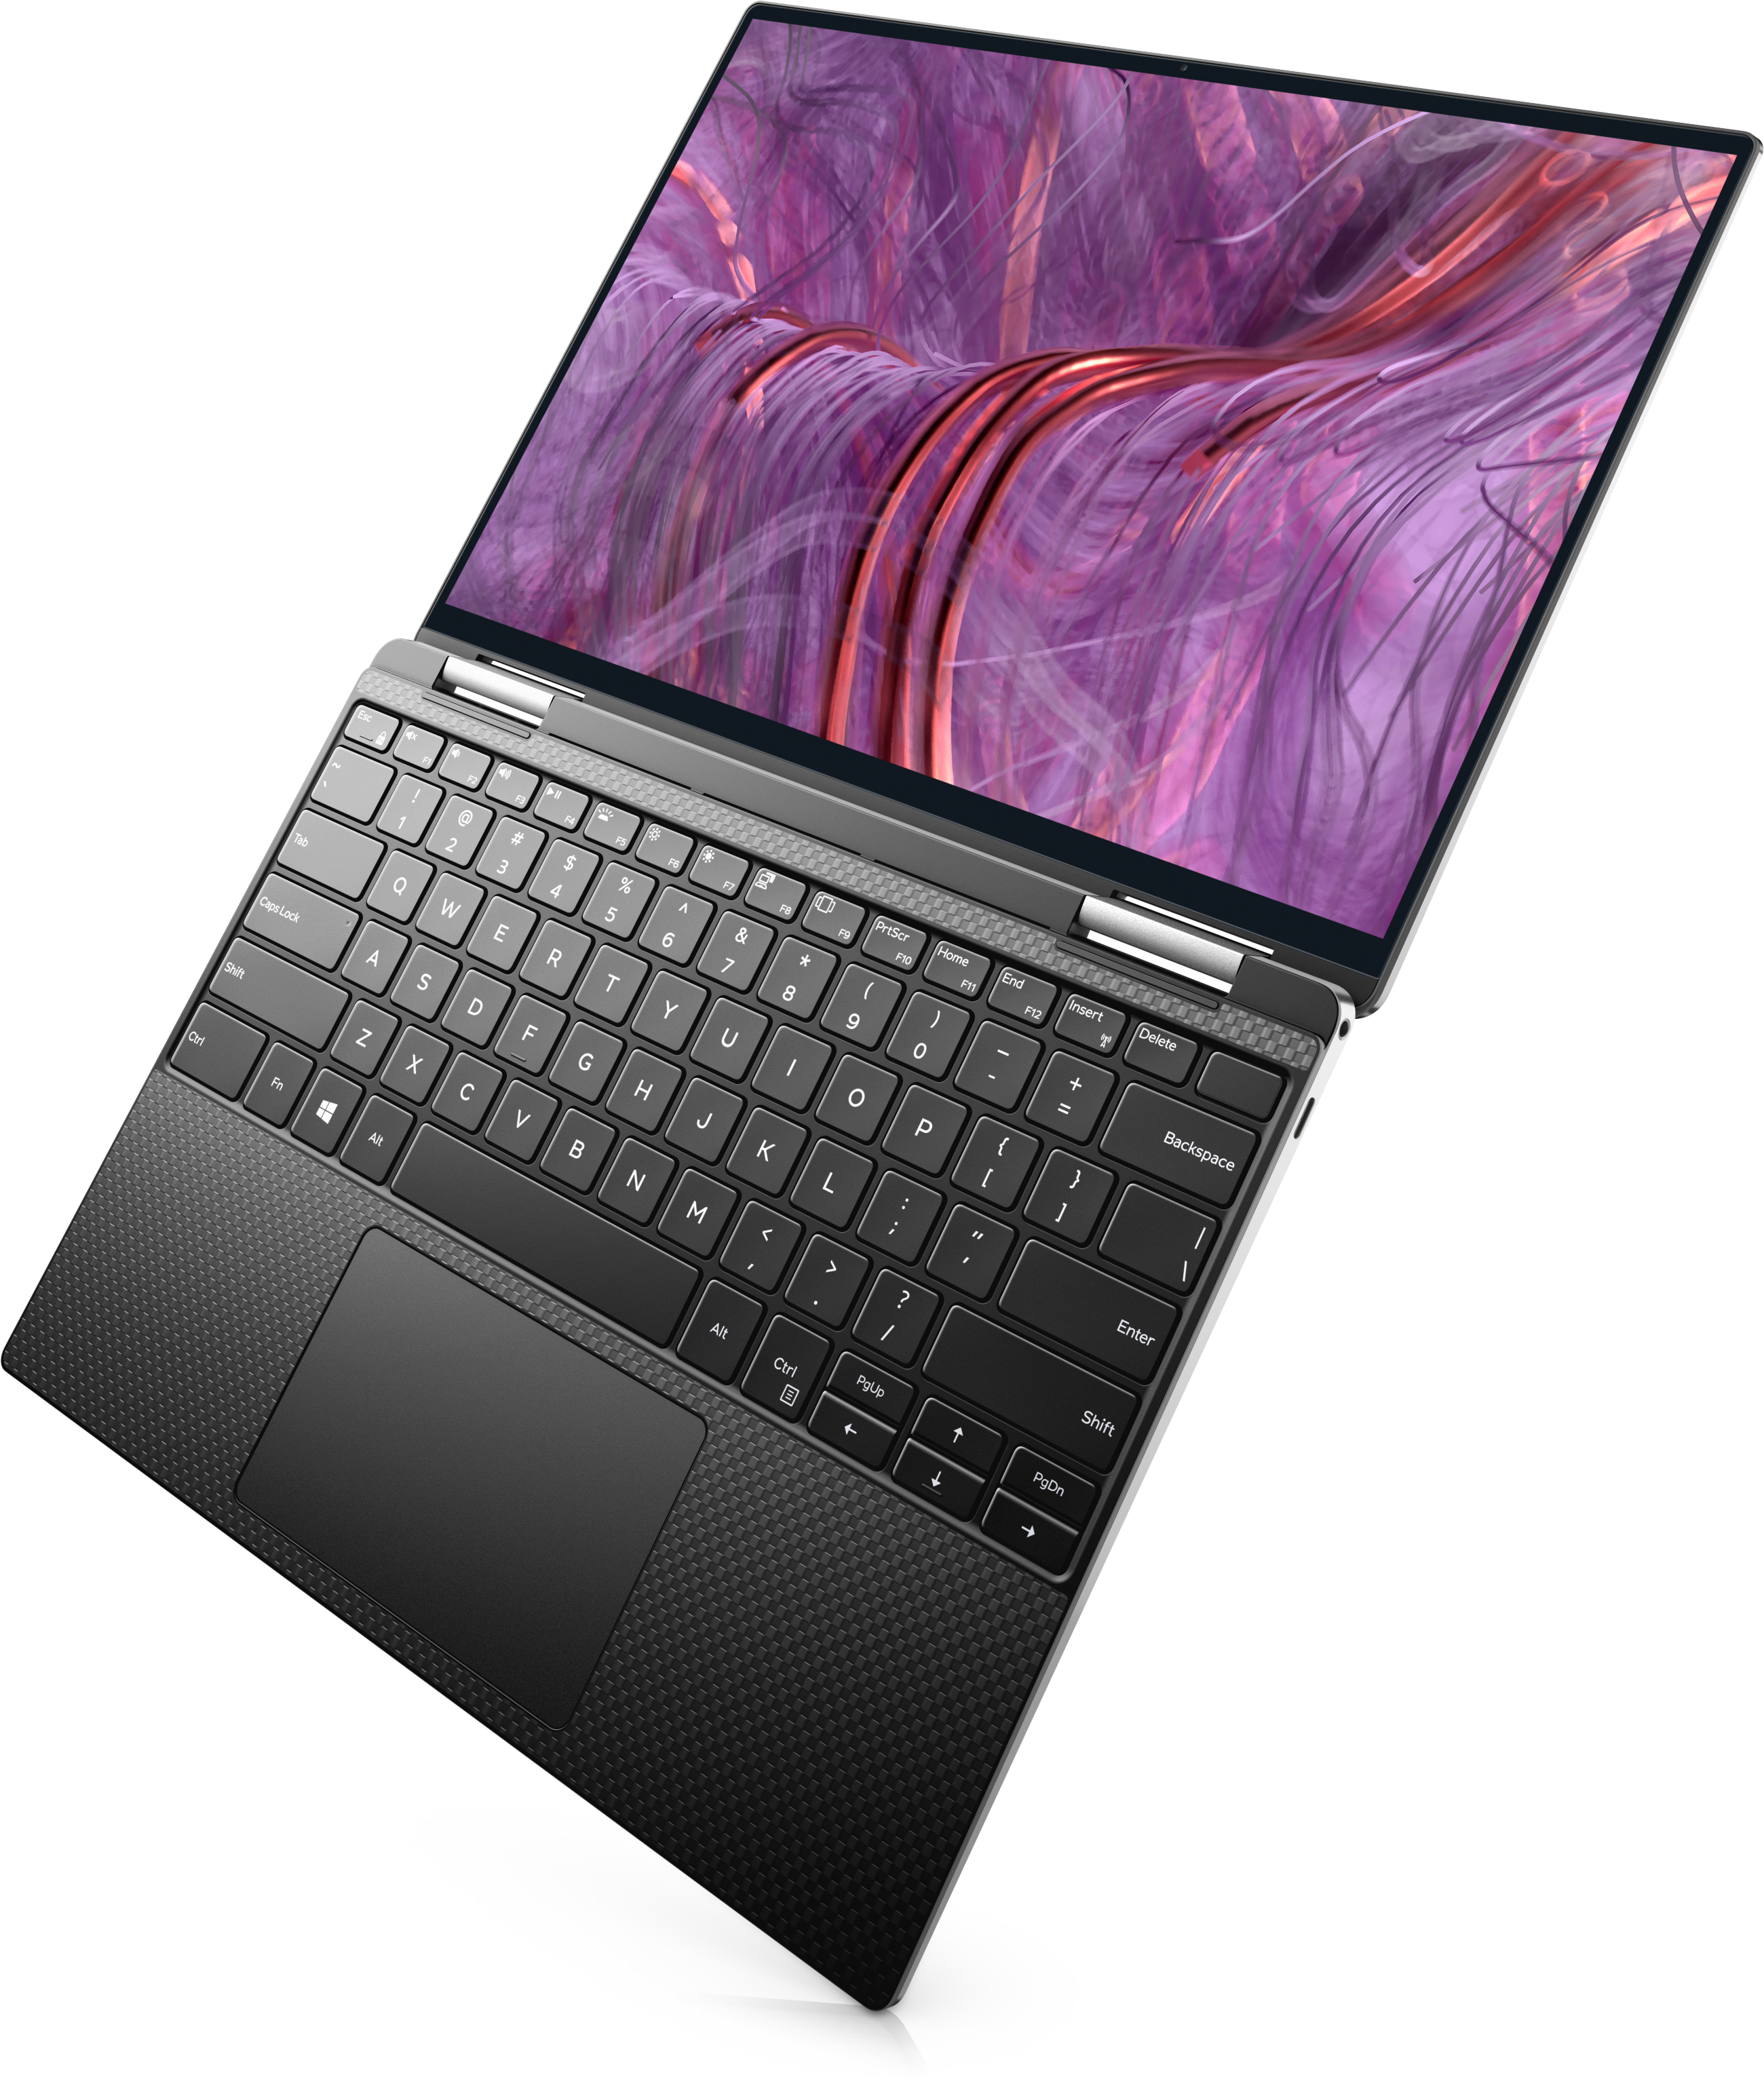 Dell releases XPS 2-in-1 tablet PC